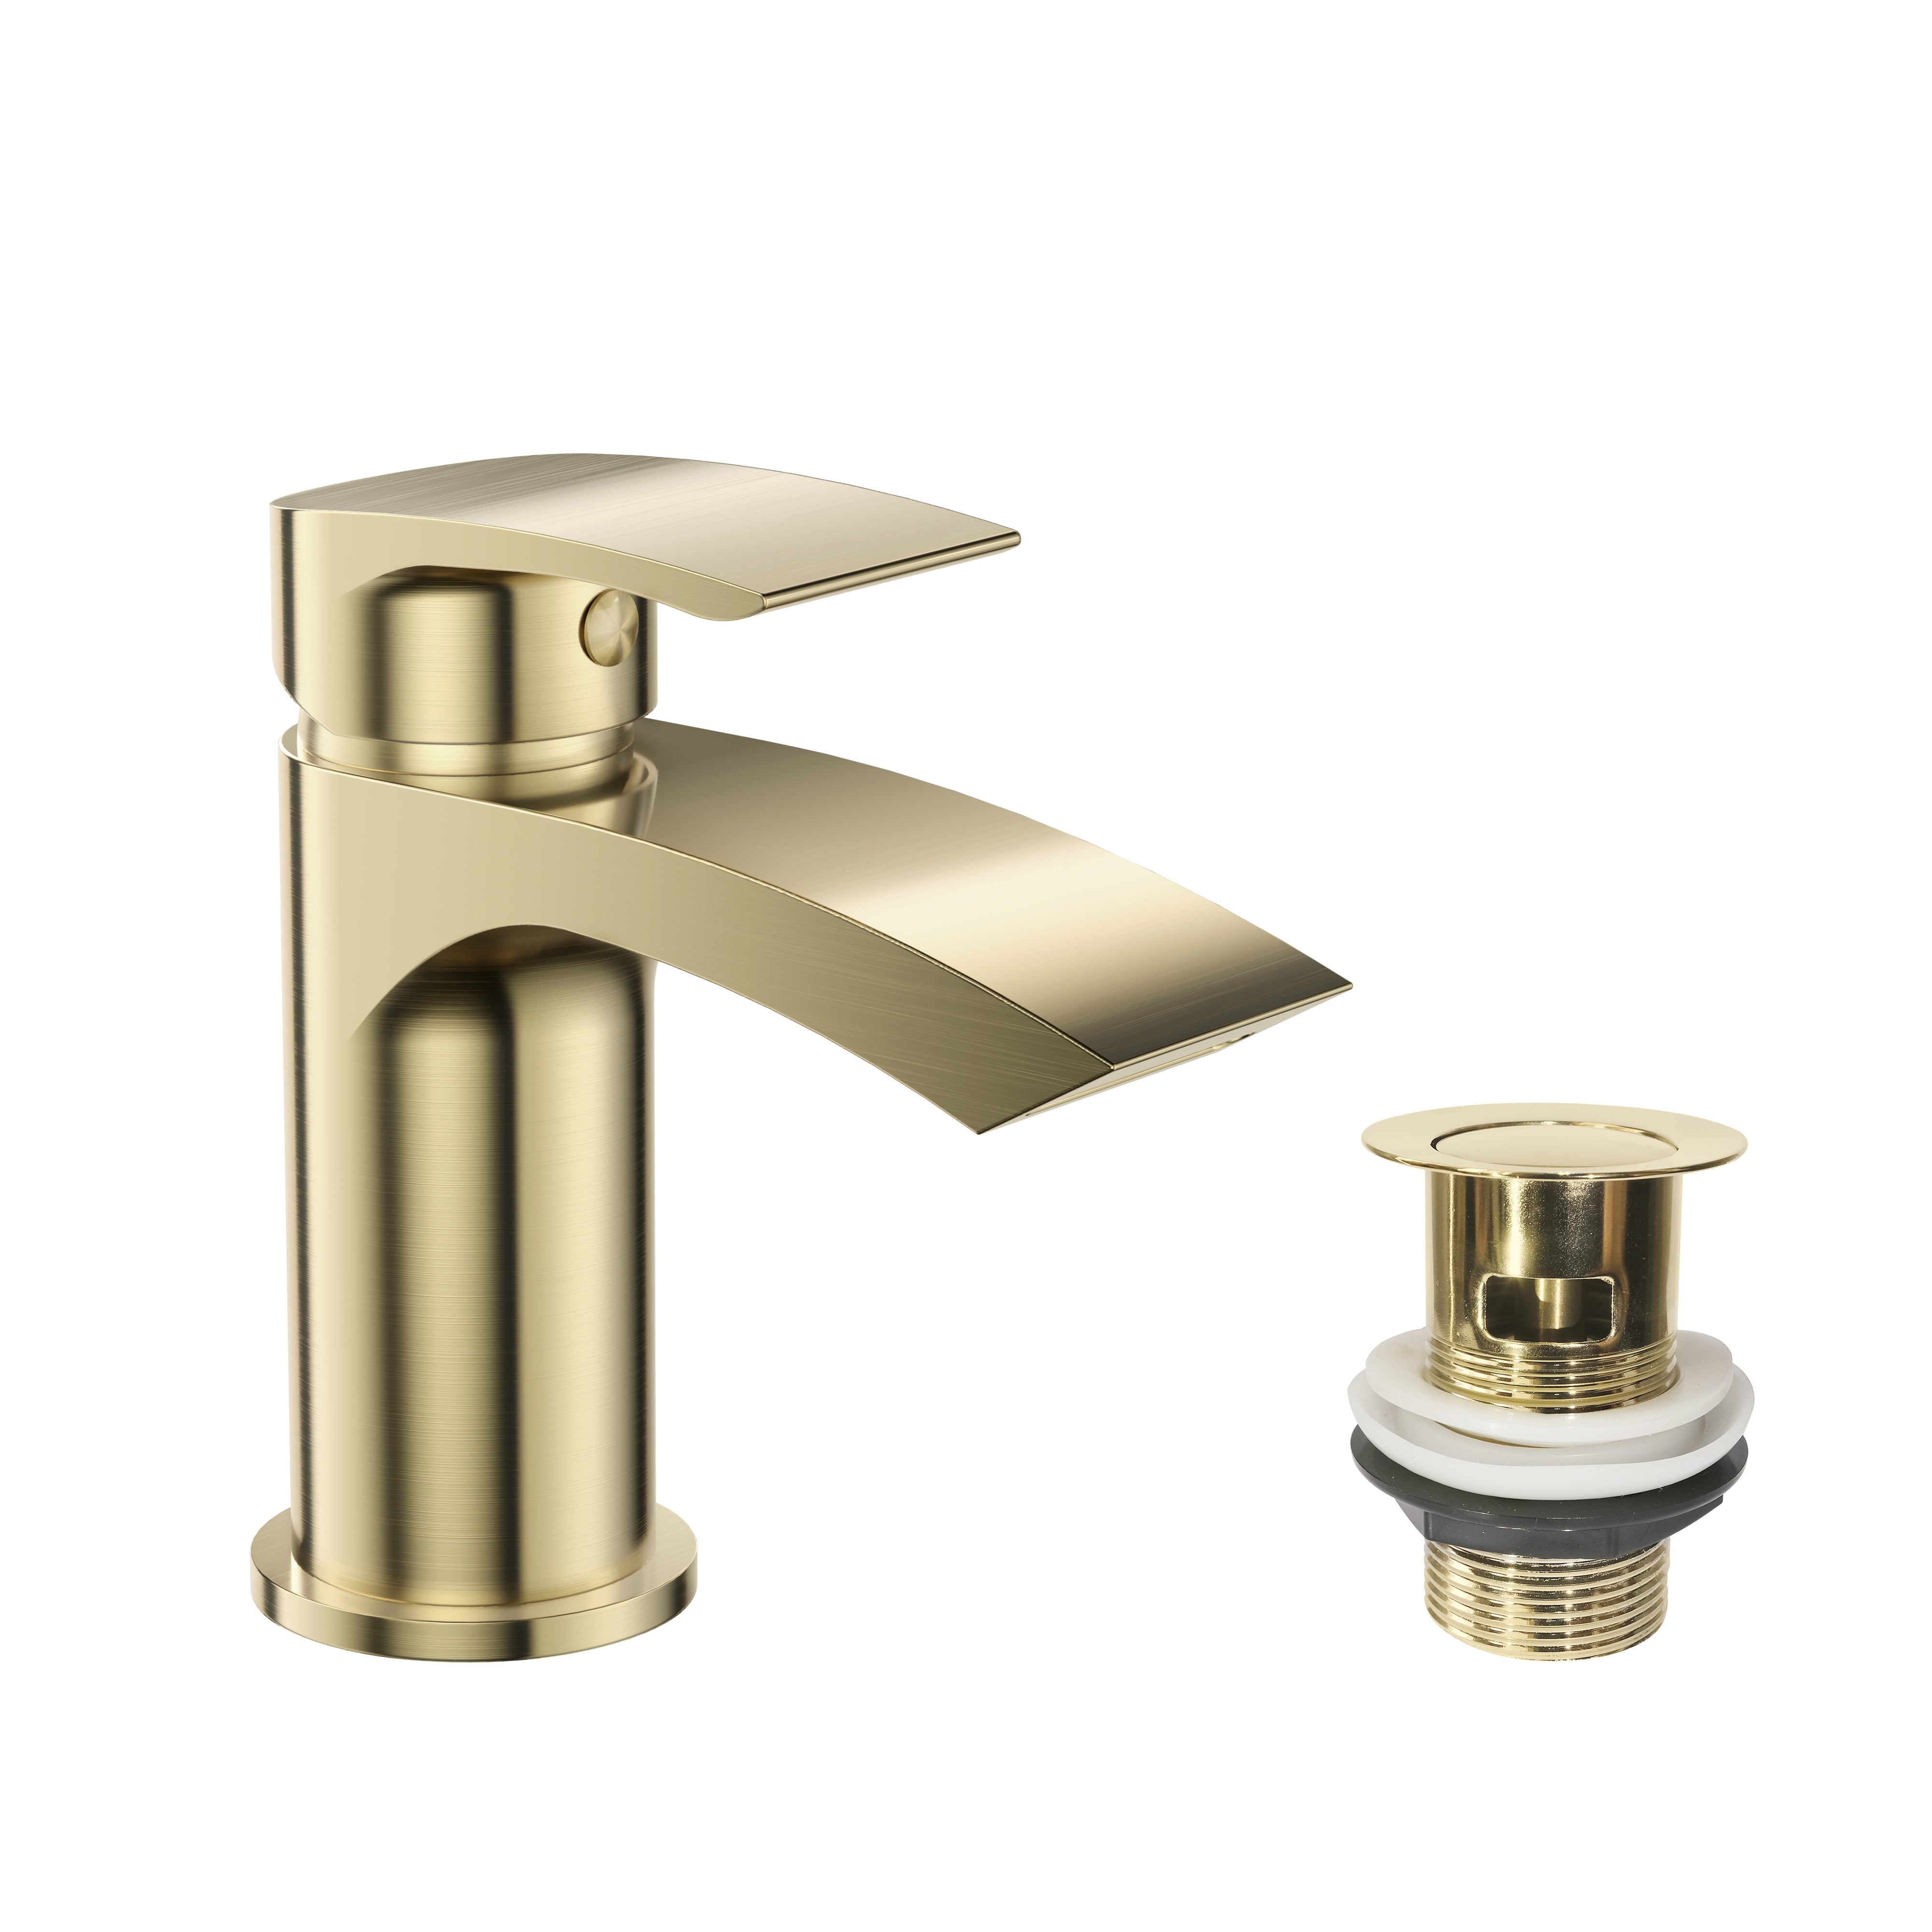 Modern Carter Mono Basin Mixer with Waste in Brushed Brass finish, ideal for contemporary bathrooms. Buy now for stylish bathroom upgrades. Best price online at Bathroom4Less.